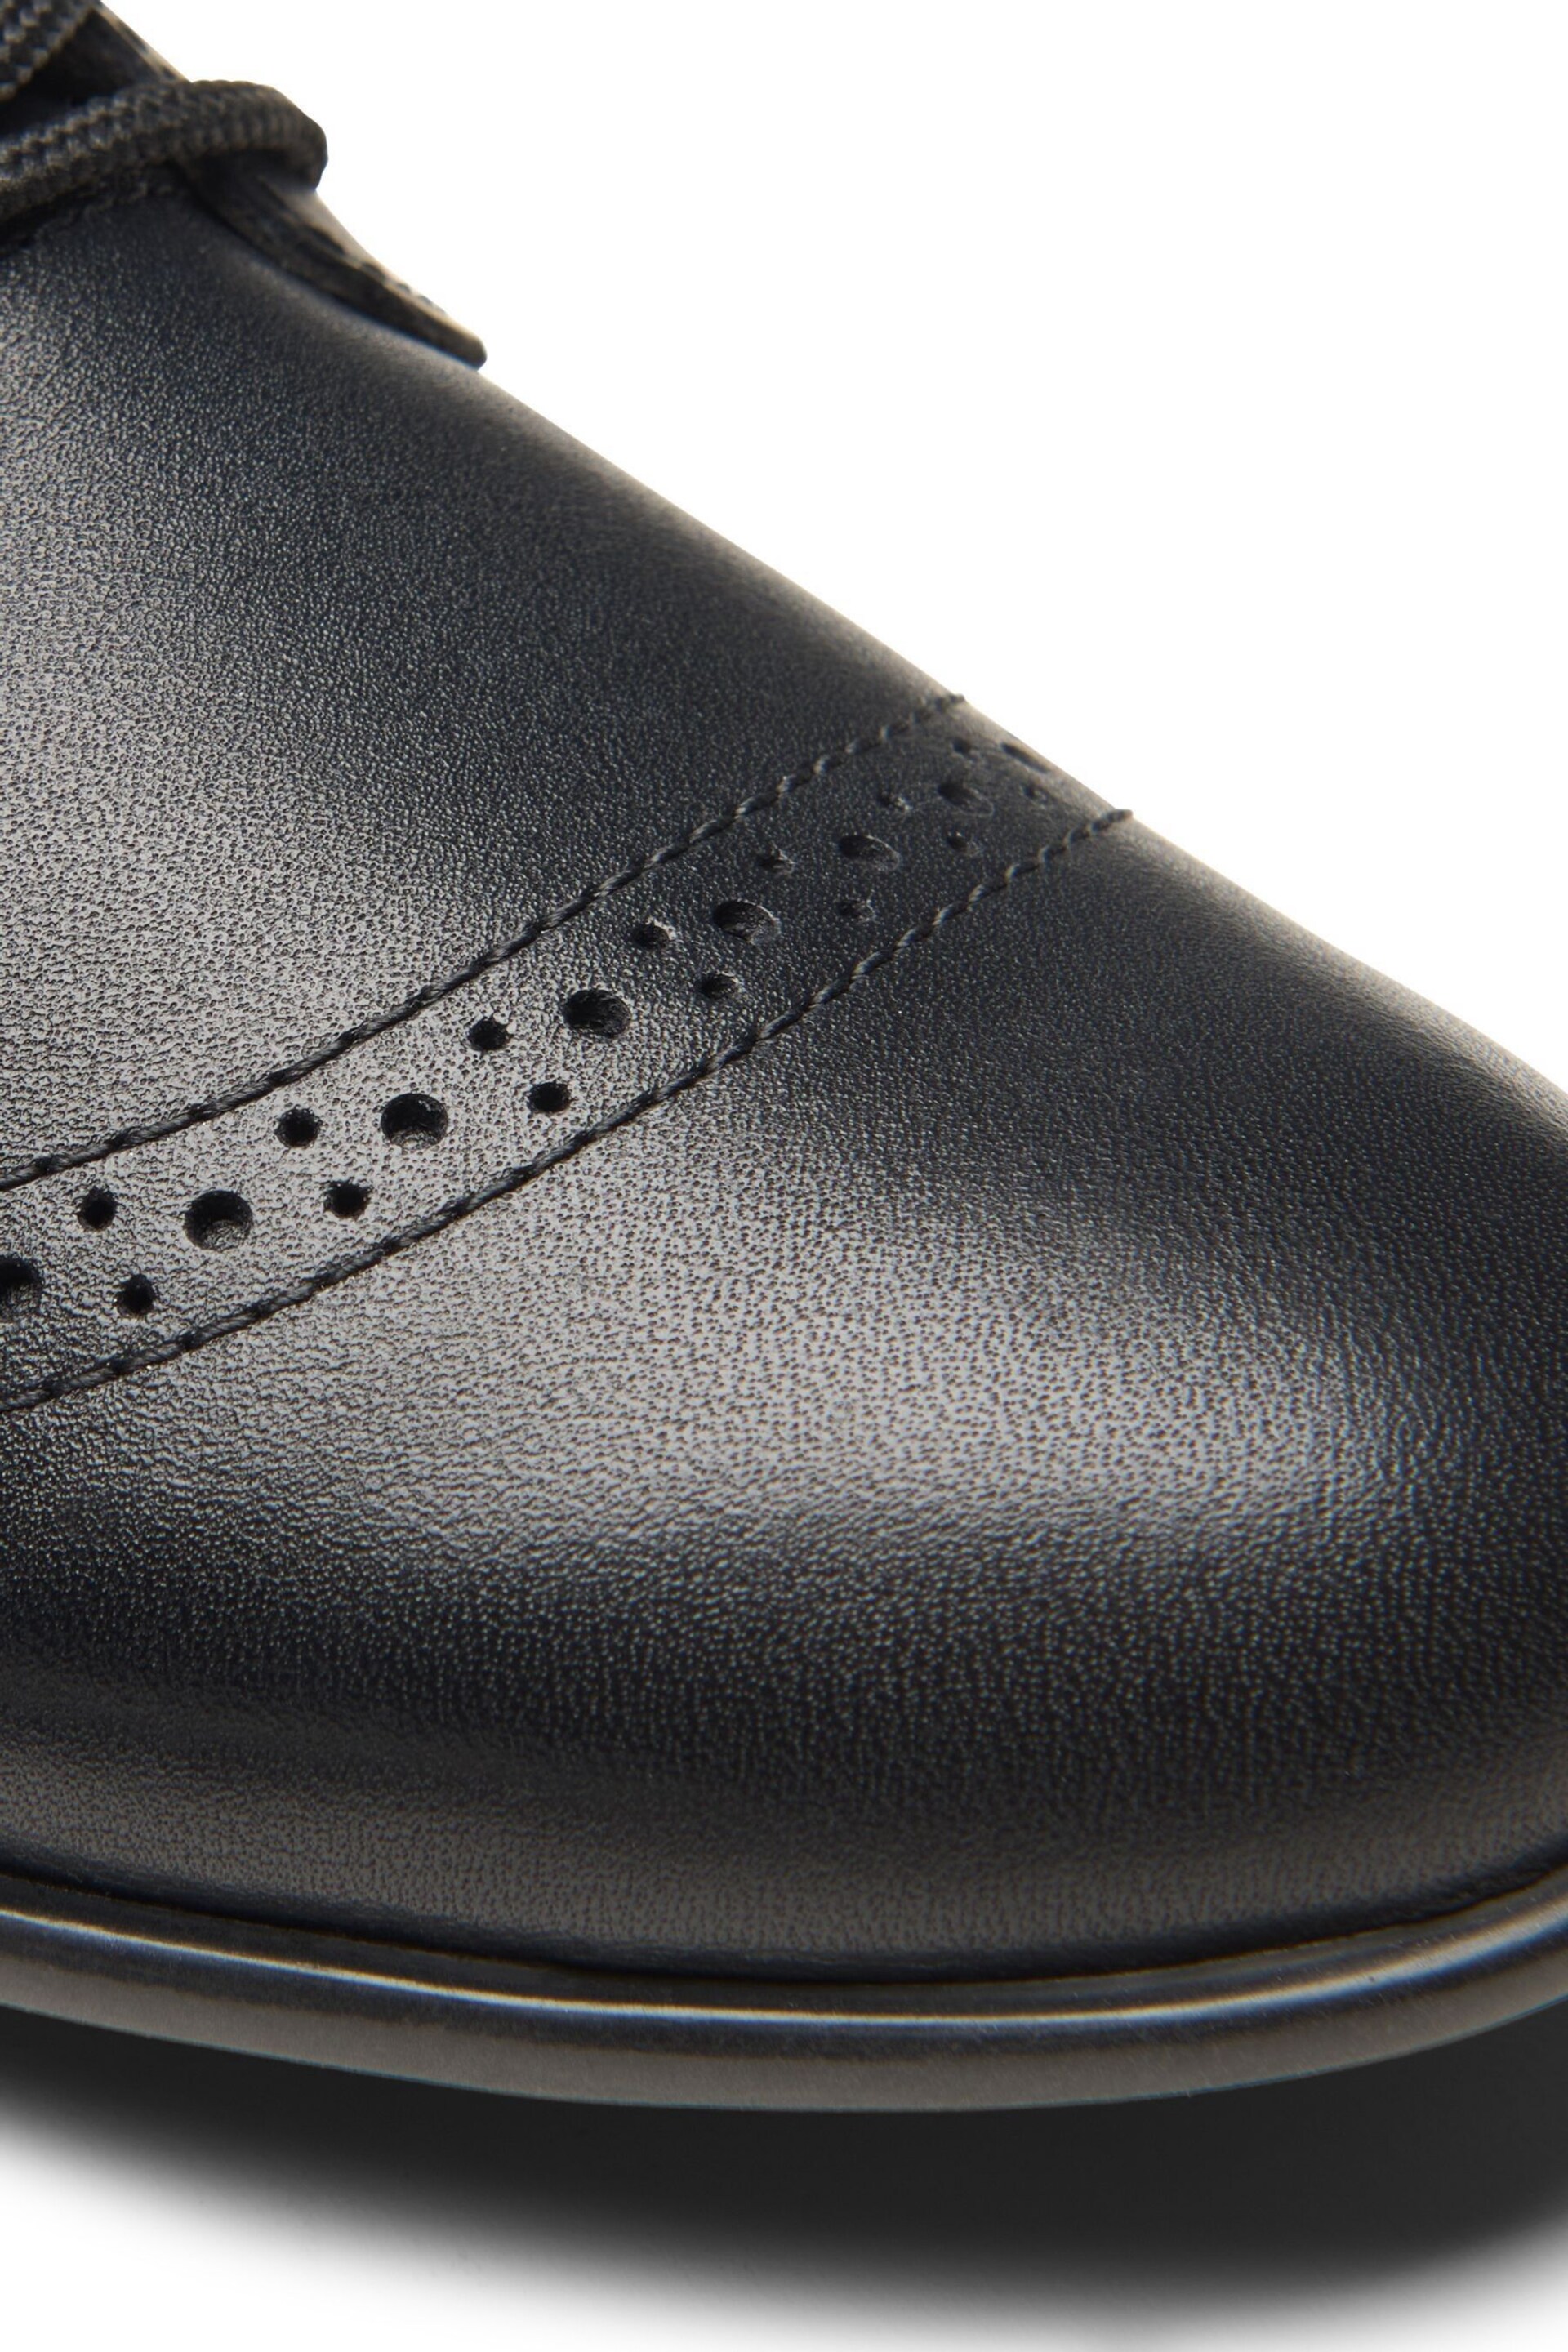 Clarks Black Leather FinjaBrogue O Shoes - Image 8 of 8